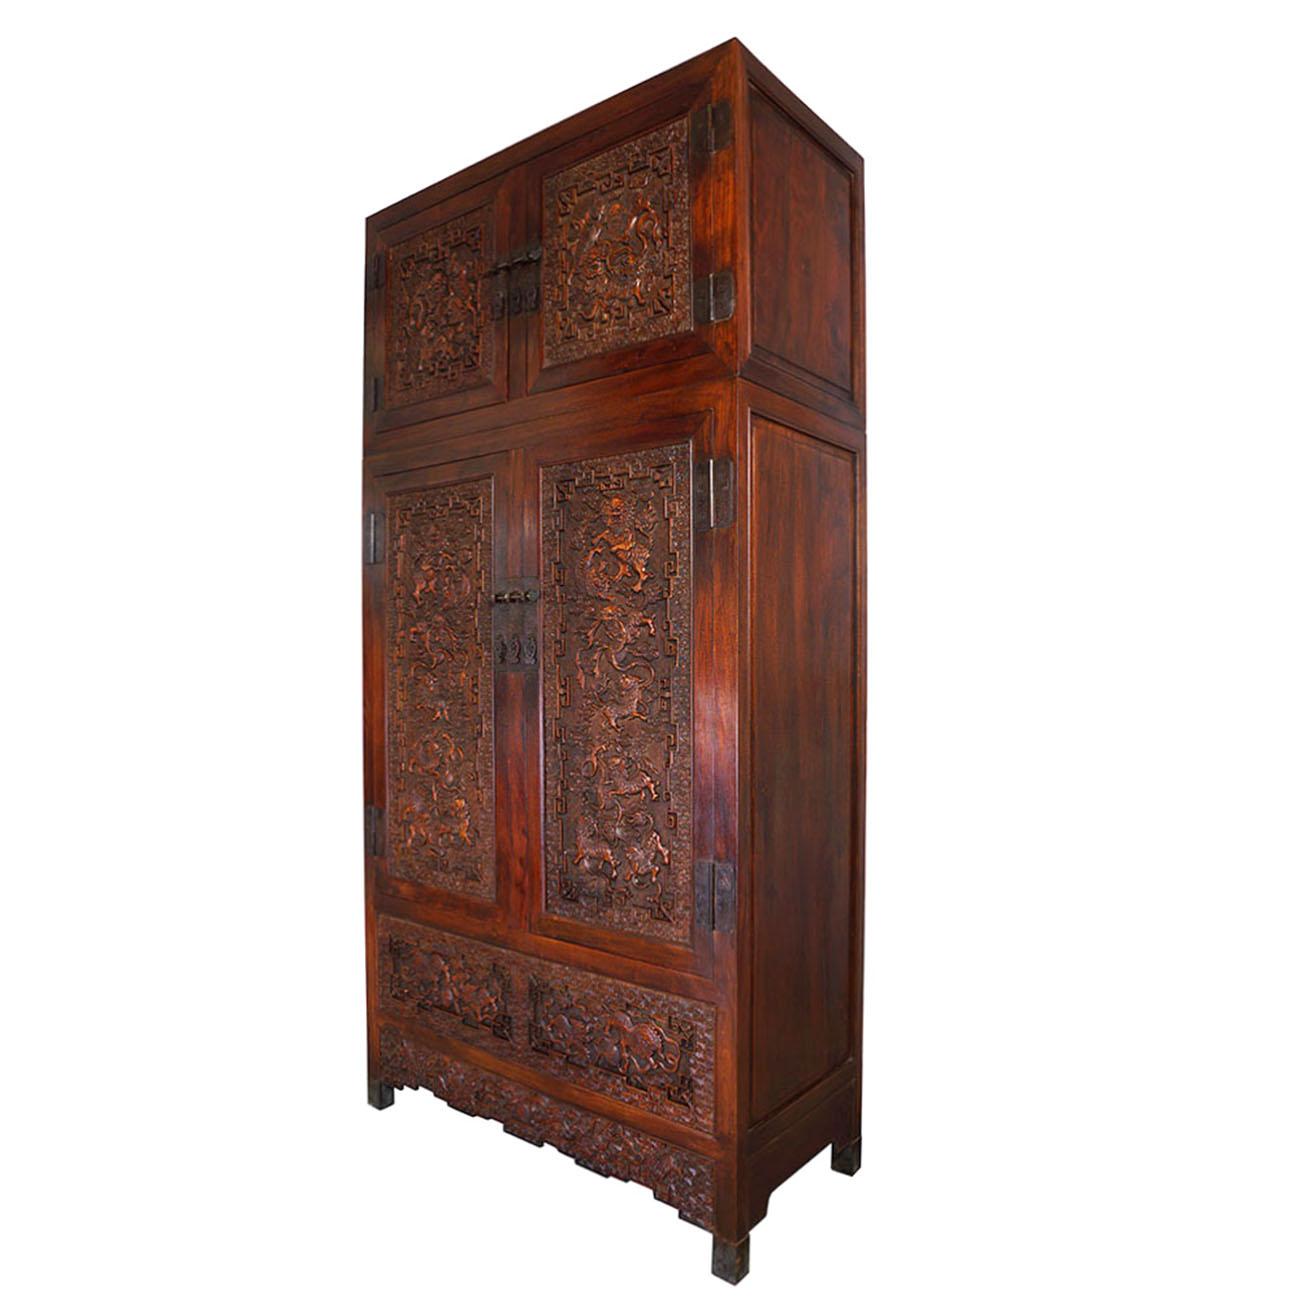 Size: 96in H x 47in W x 21 3/4in D
Door opening: top: 21 1/2in H x 42 1/2in W
Lower cabinet: 43 1/2in H x 42 1/2in W
Origin: China
Circa: 1900
Material: Camphor wood
Condition: Solid wood construction, finished on sides/back, beautiful massive